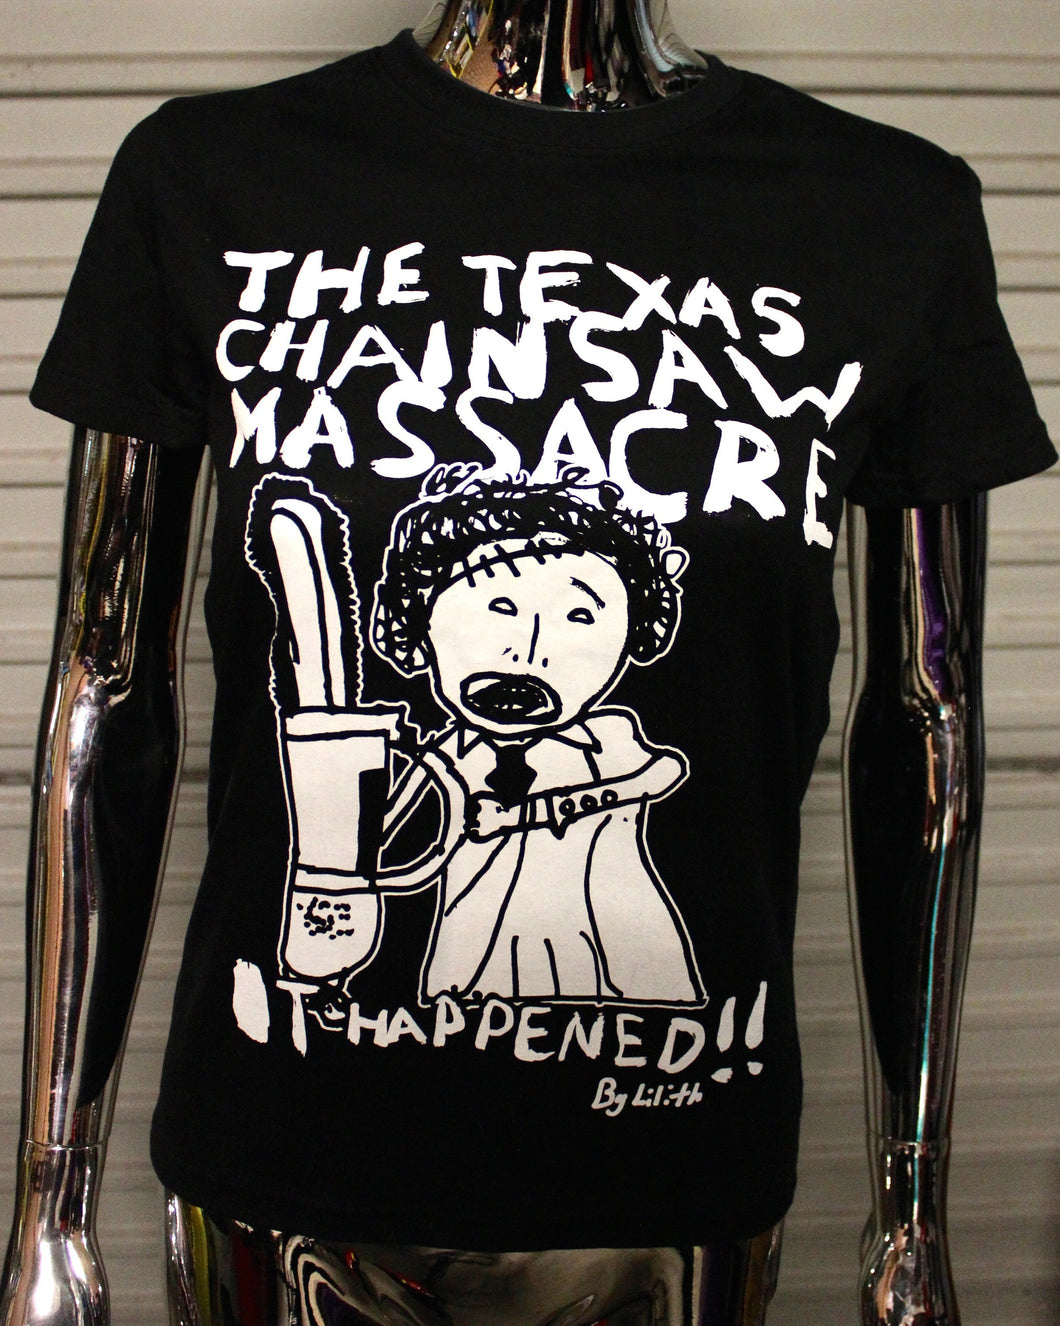 Women's Texas Chainsaw Massacre by Lilith T-shirt